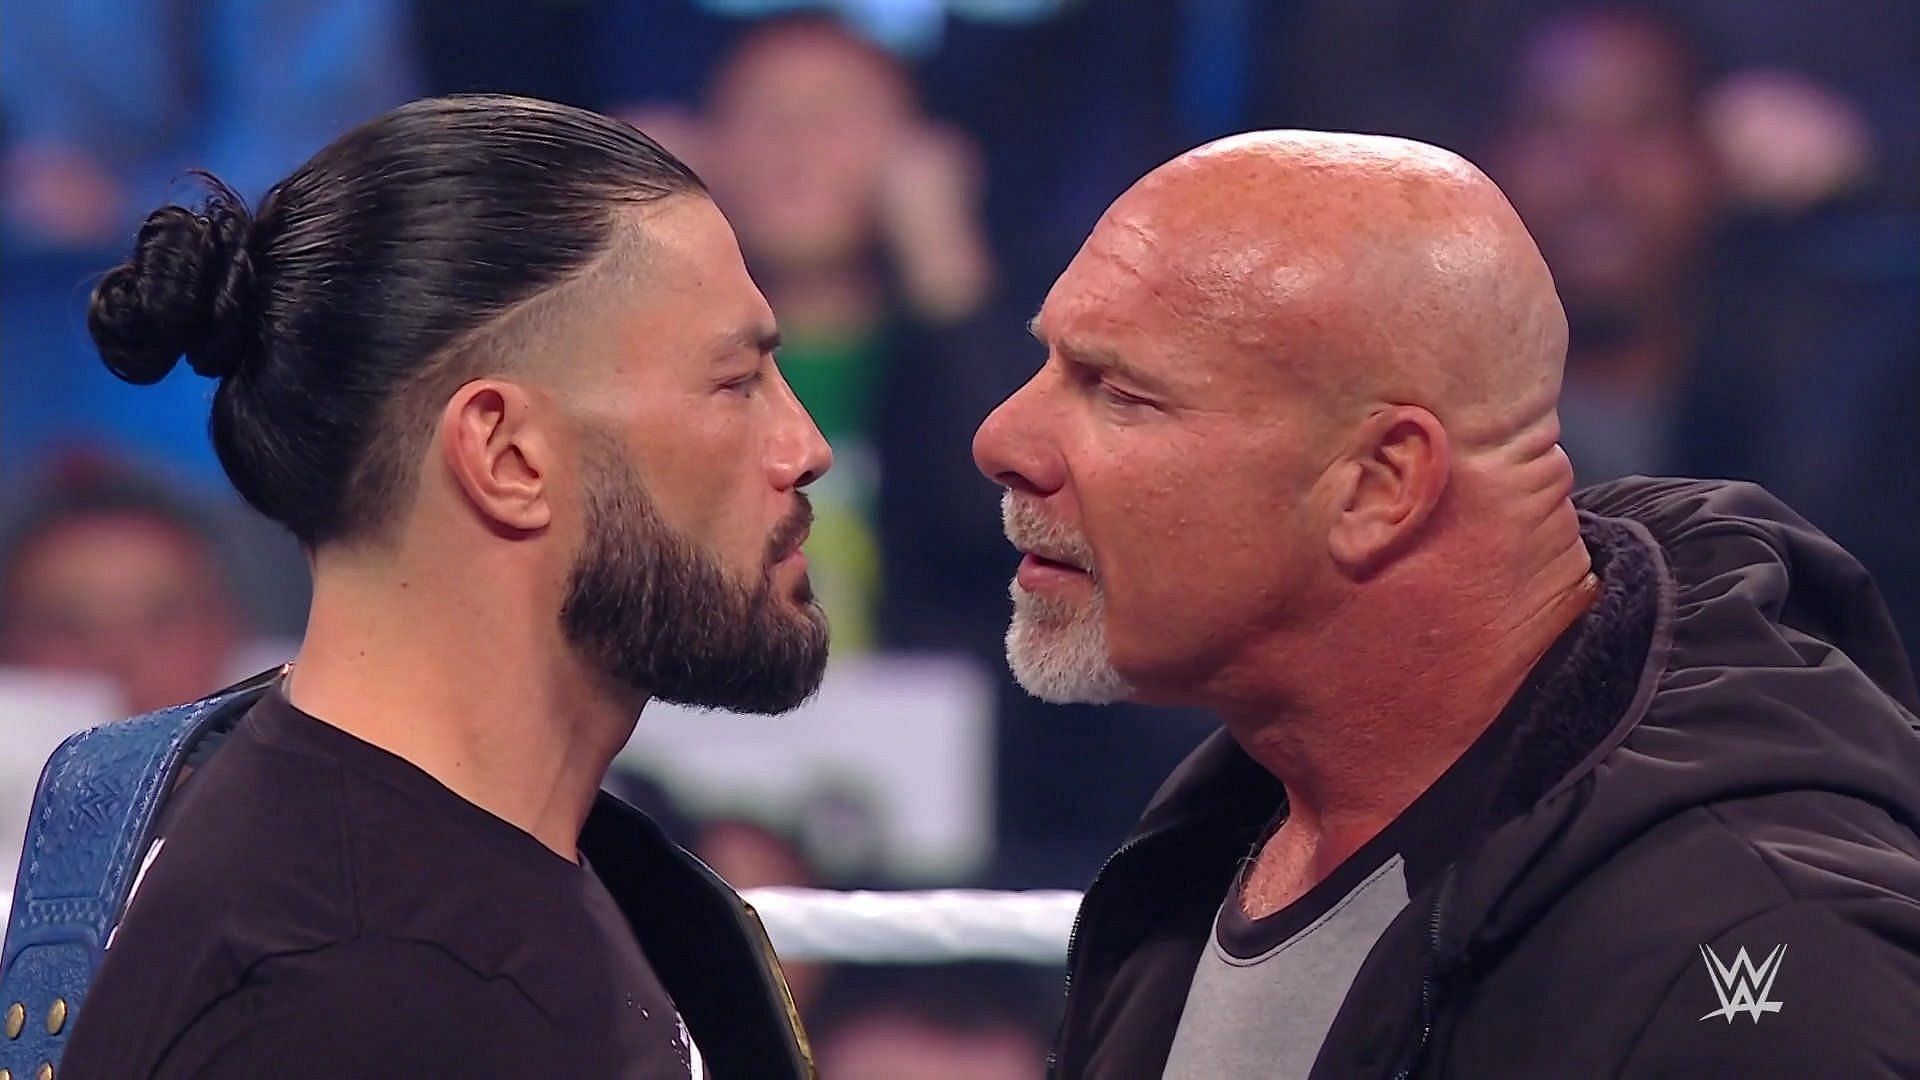 The Head of The Table was challenged by Goldberg to a match at Elimination Chamber